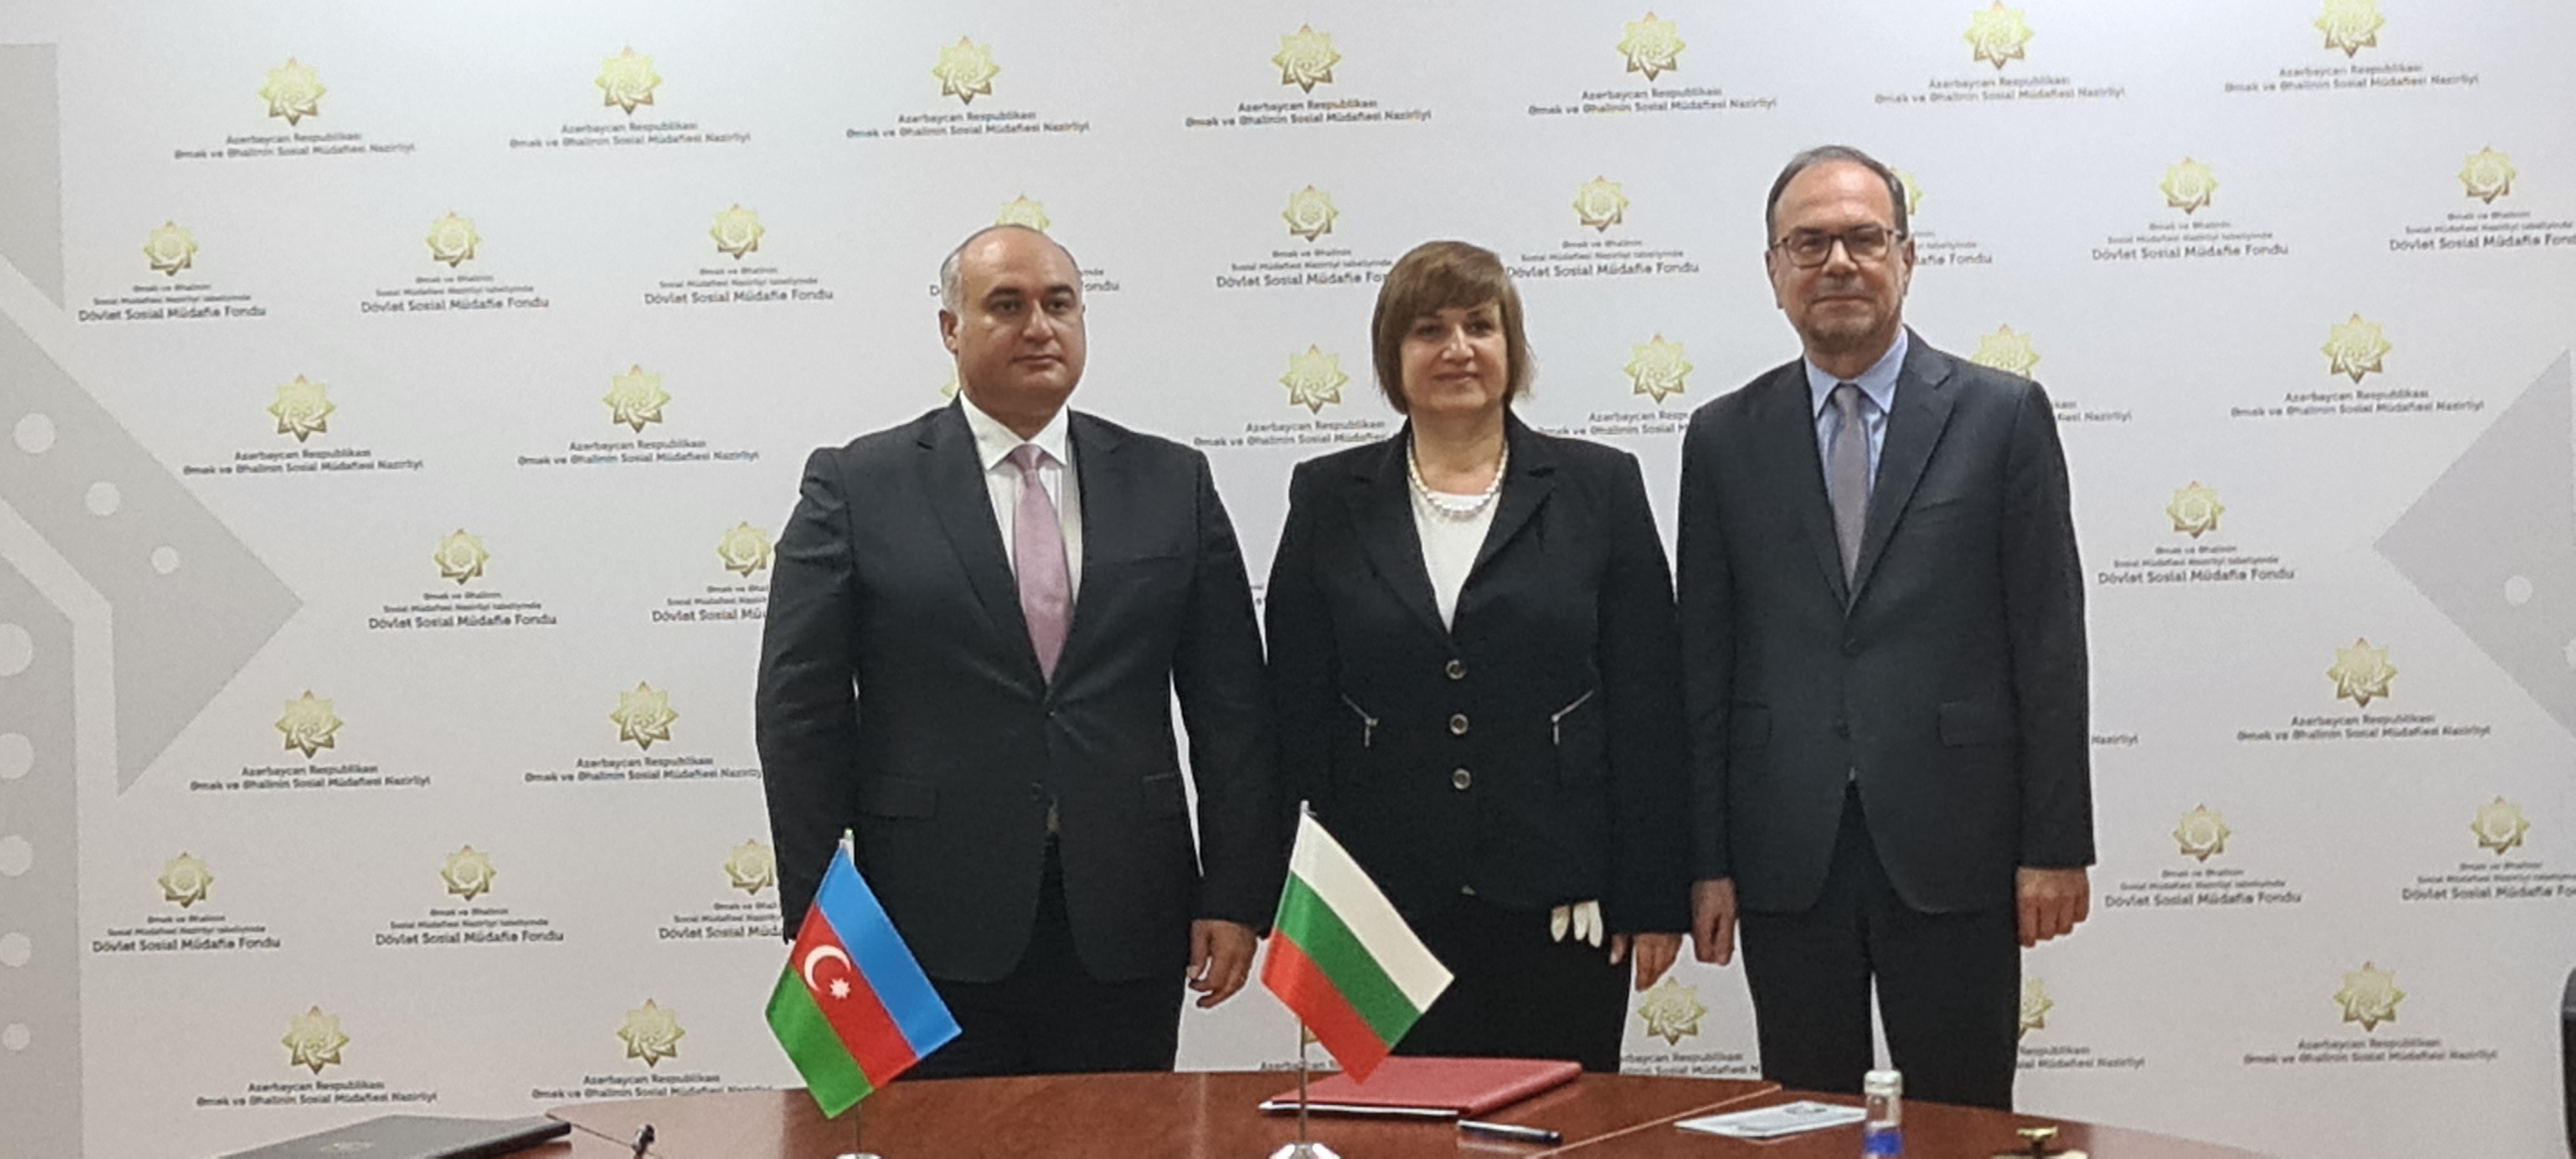 A Memorandum of Cooperation in the field of social insurance services was signed in Baku between the National Insurance Institute of the Republic of Bulgaria and the Social Protection Fund of the Republic of Azerbaijan